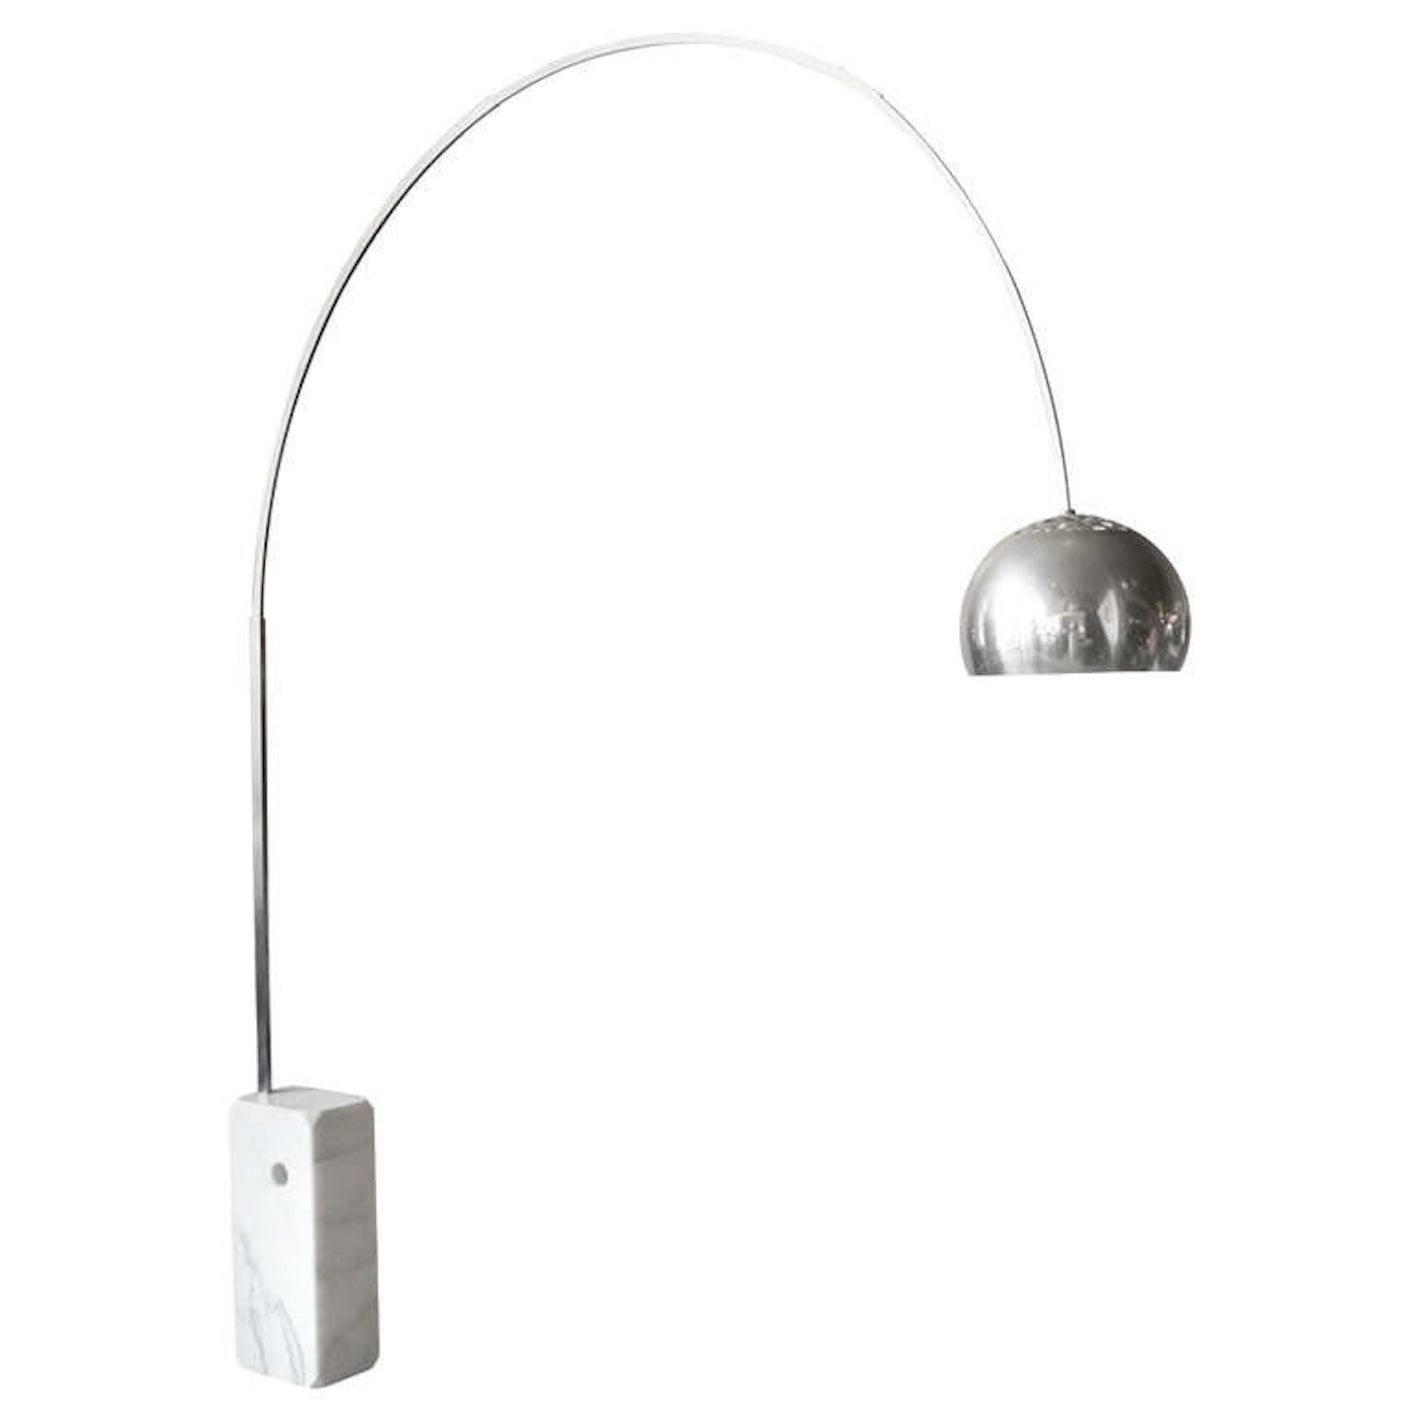 1960's "Arco" Floor Lamp for FLOS by A. & P. Castiglione